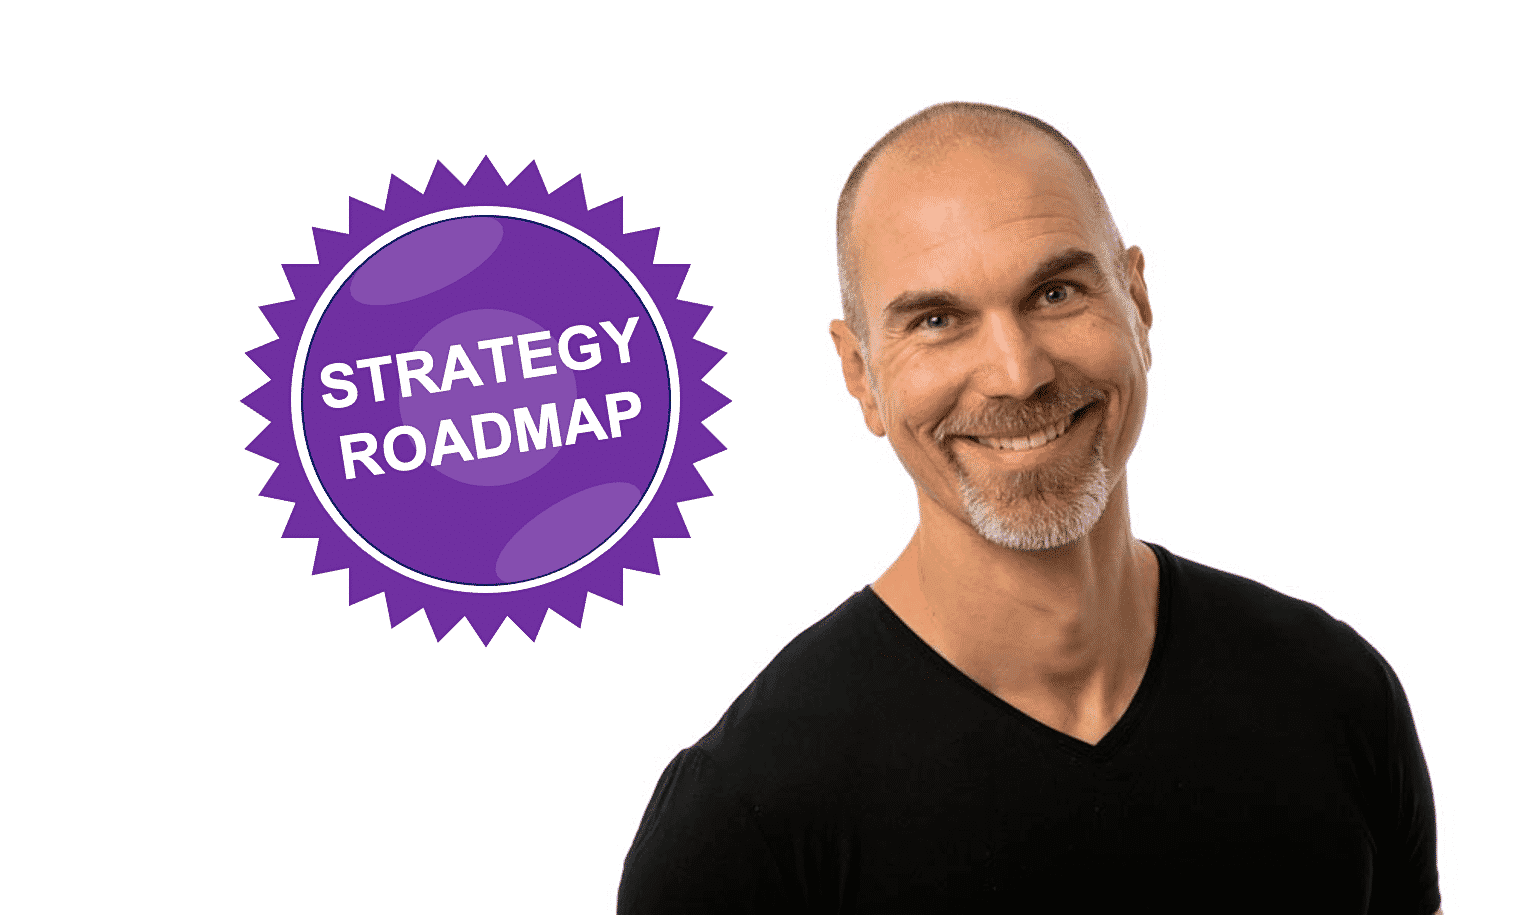 Roman's Product Strategy and Roadmap Training